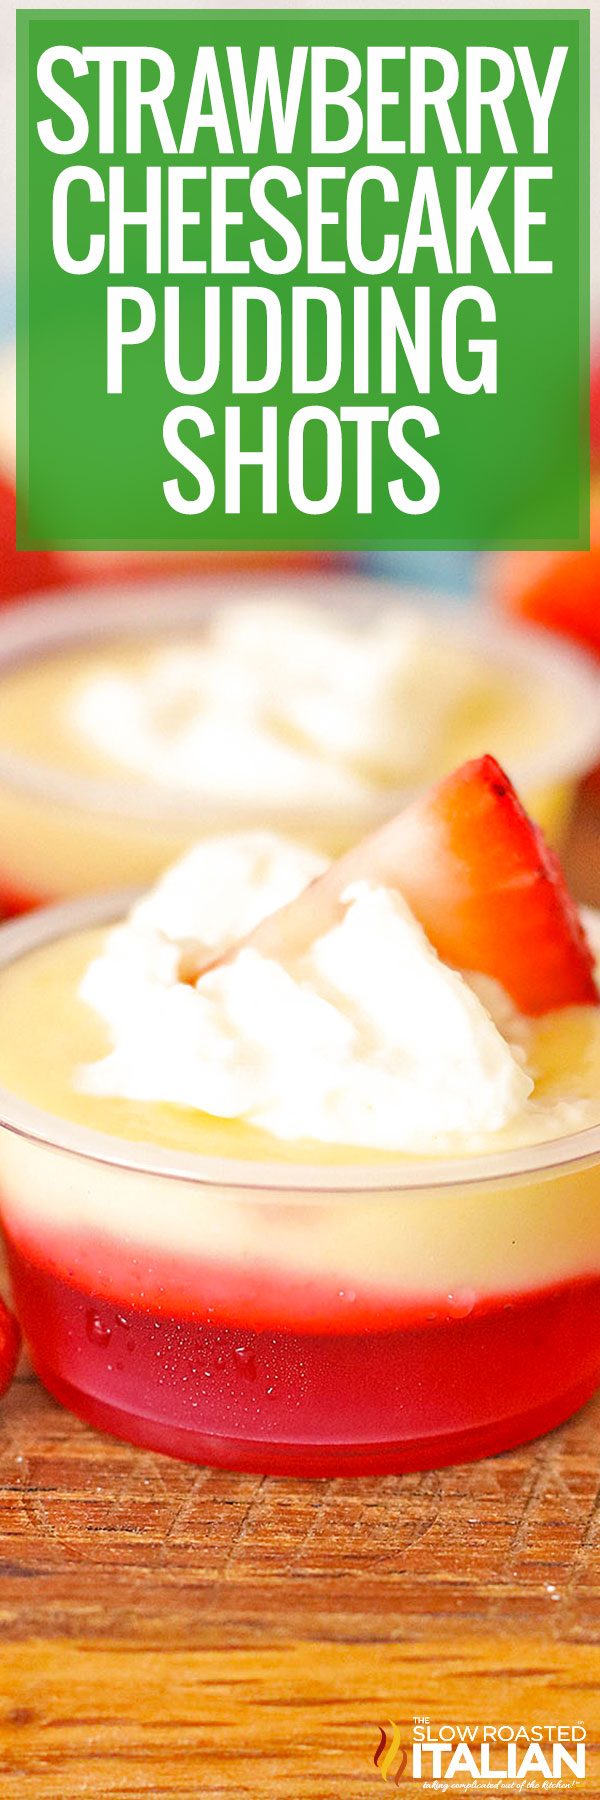 Strawberry Cheesecake Pudding Shots close up of whipped cream and sliced strawberry